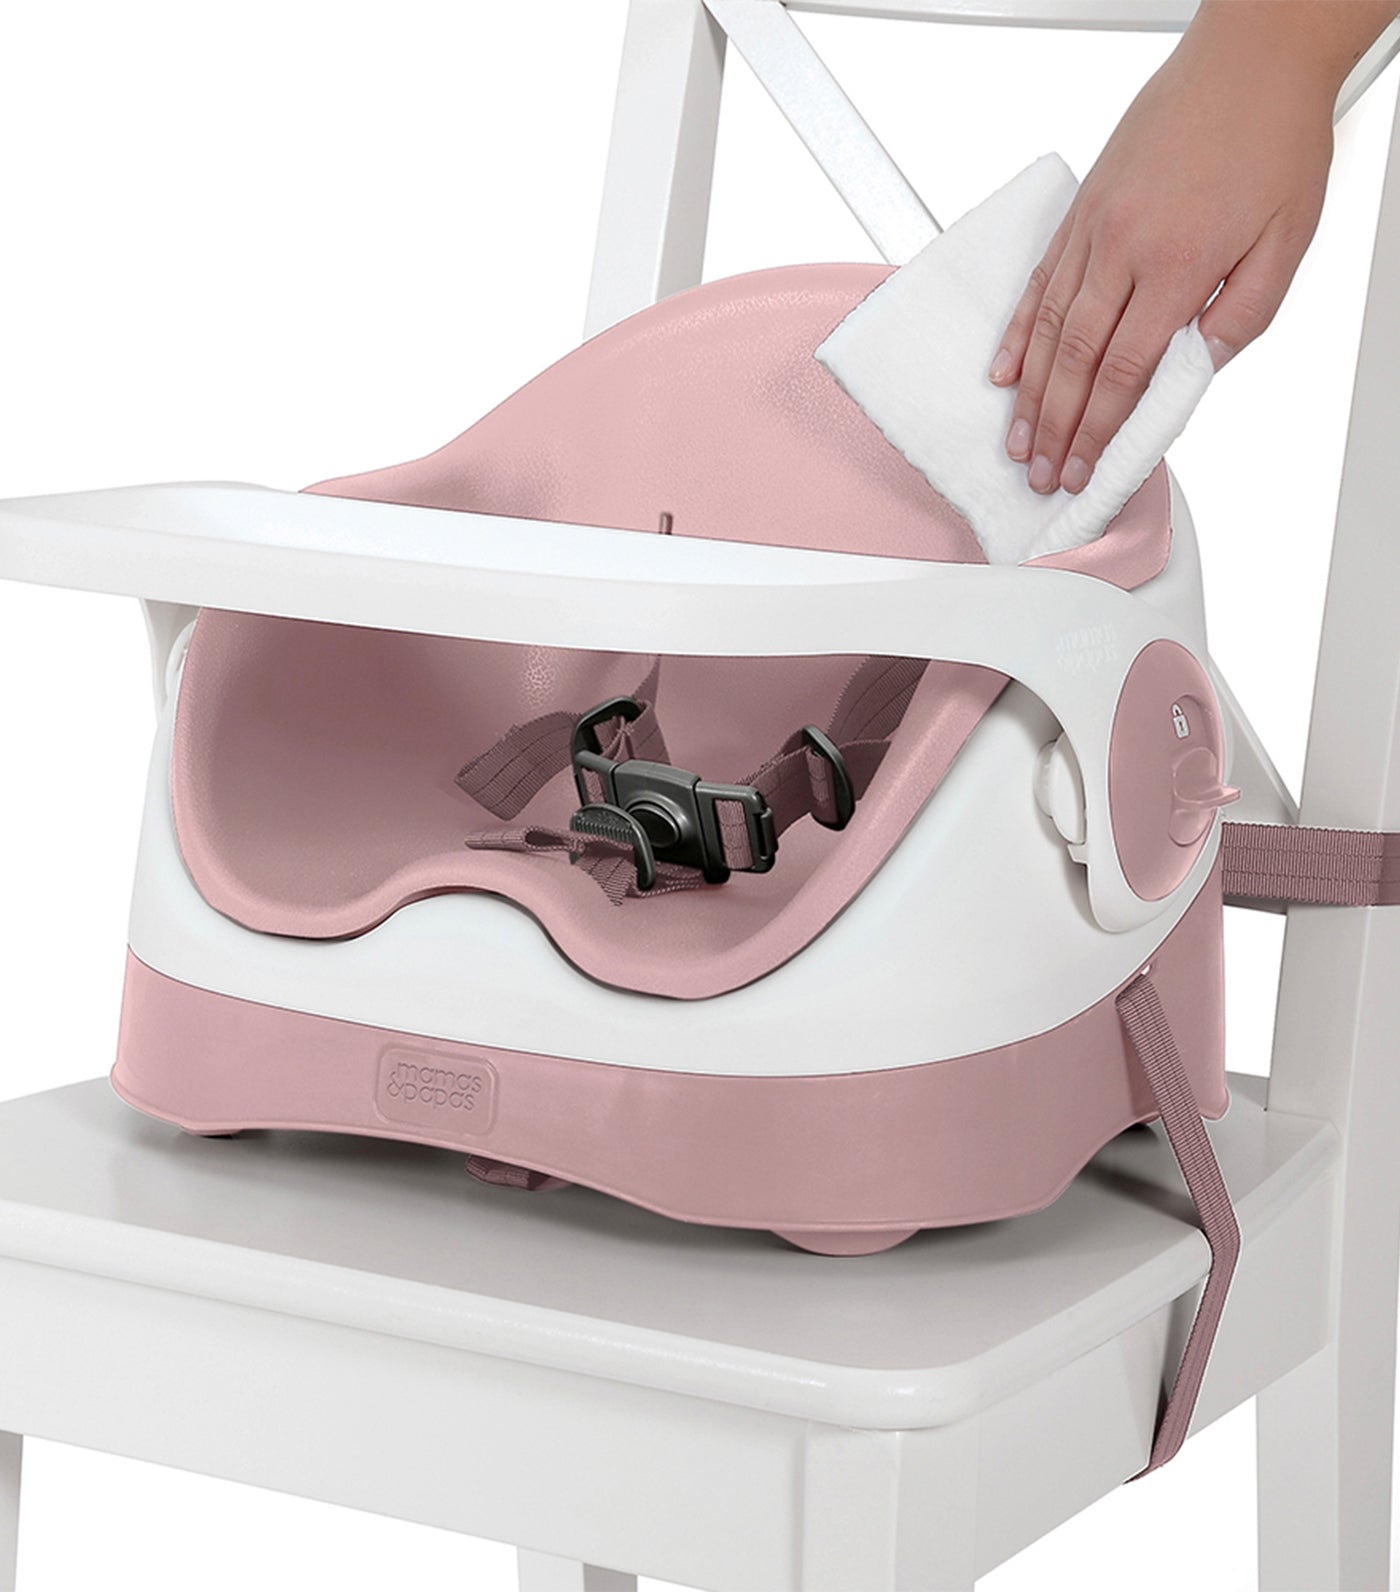 Baby Bud Booster Seat with Detachable Tray - Blossom